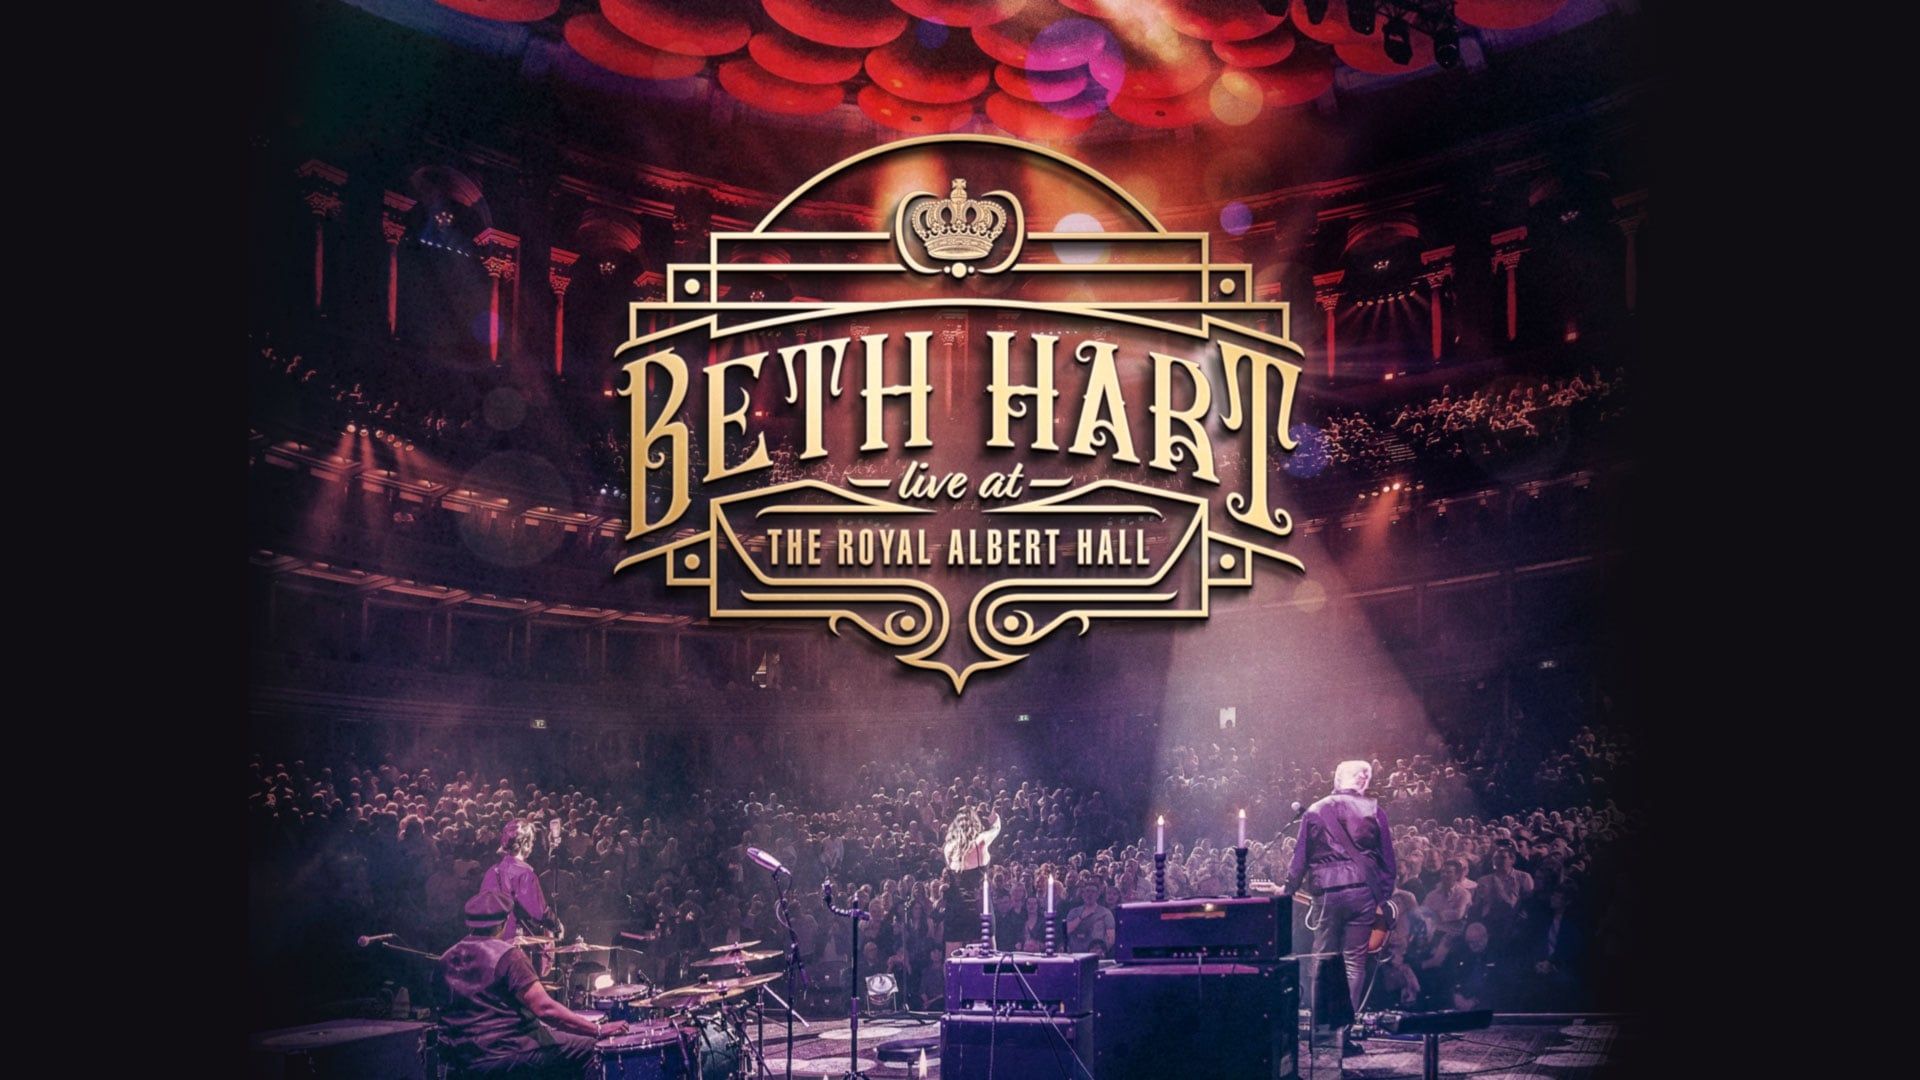 Beth Hart Live at The Royal Albert Hall background